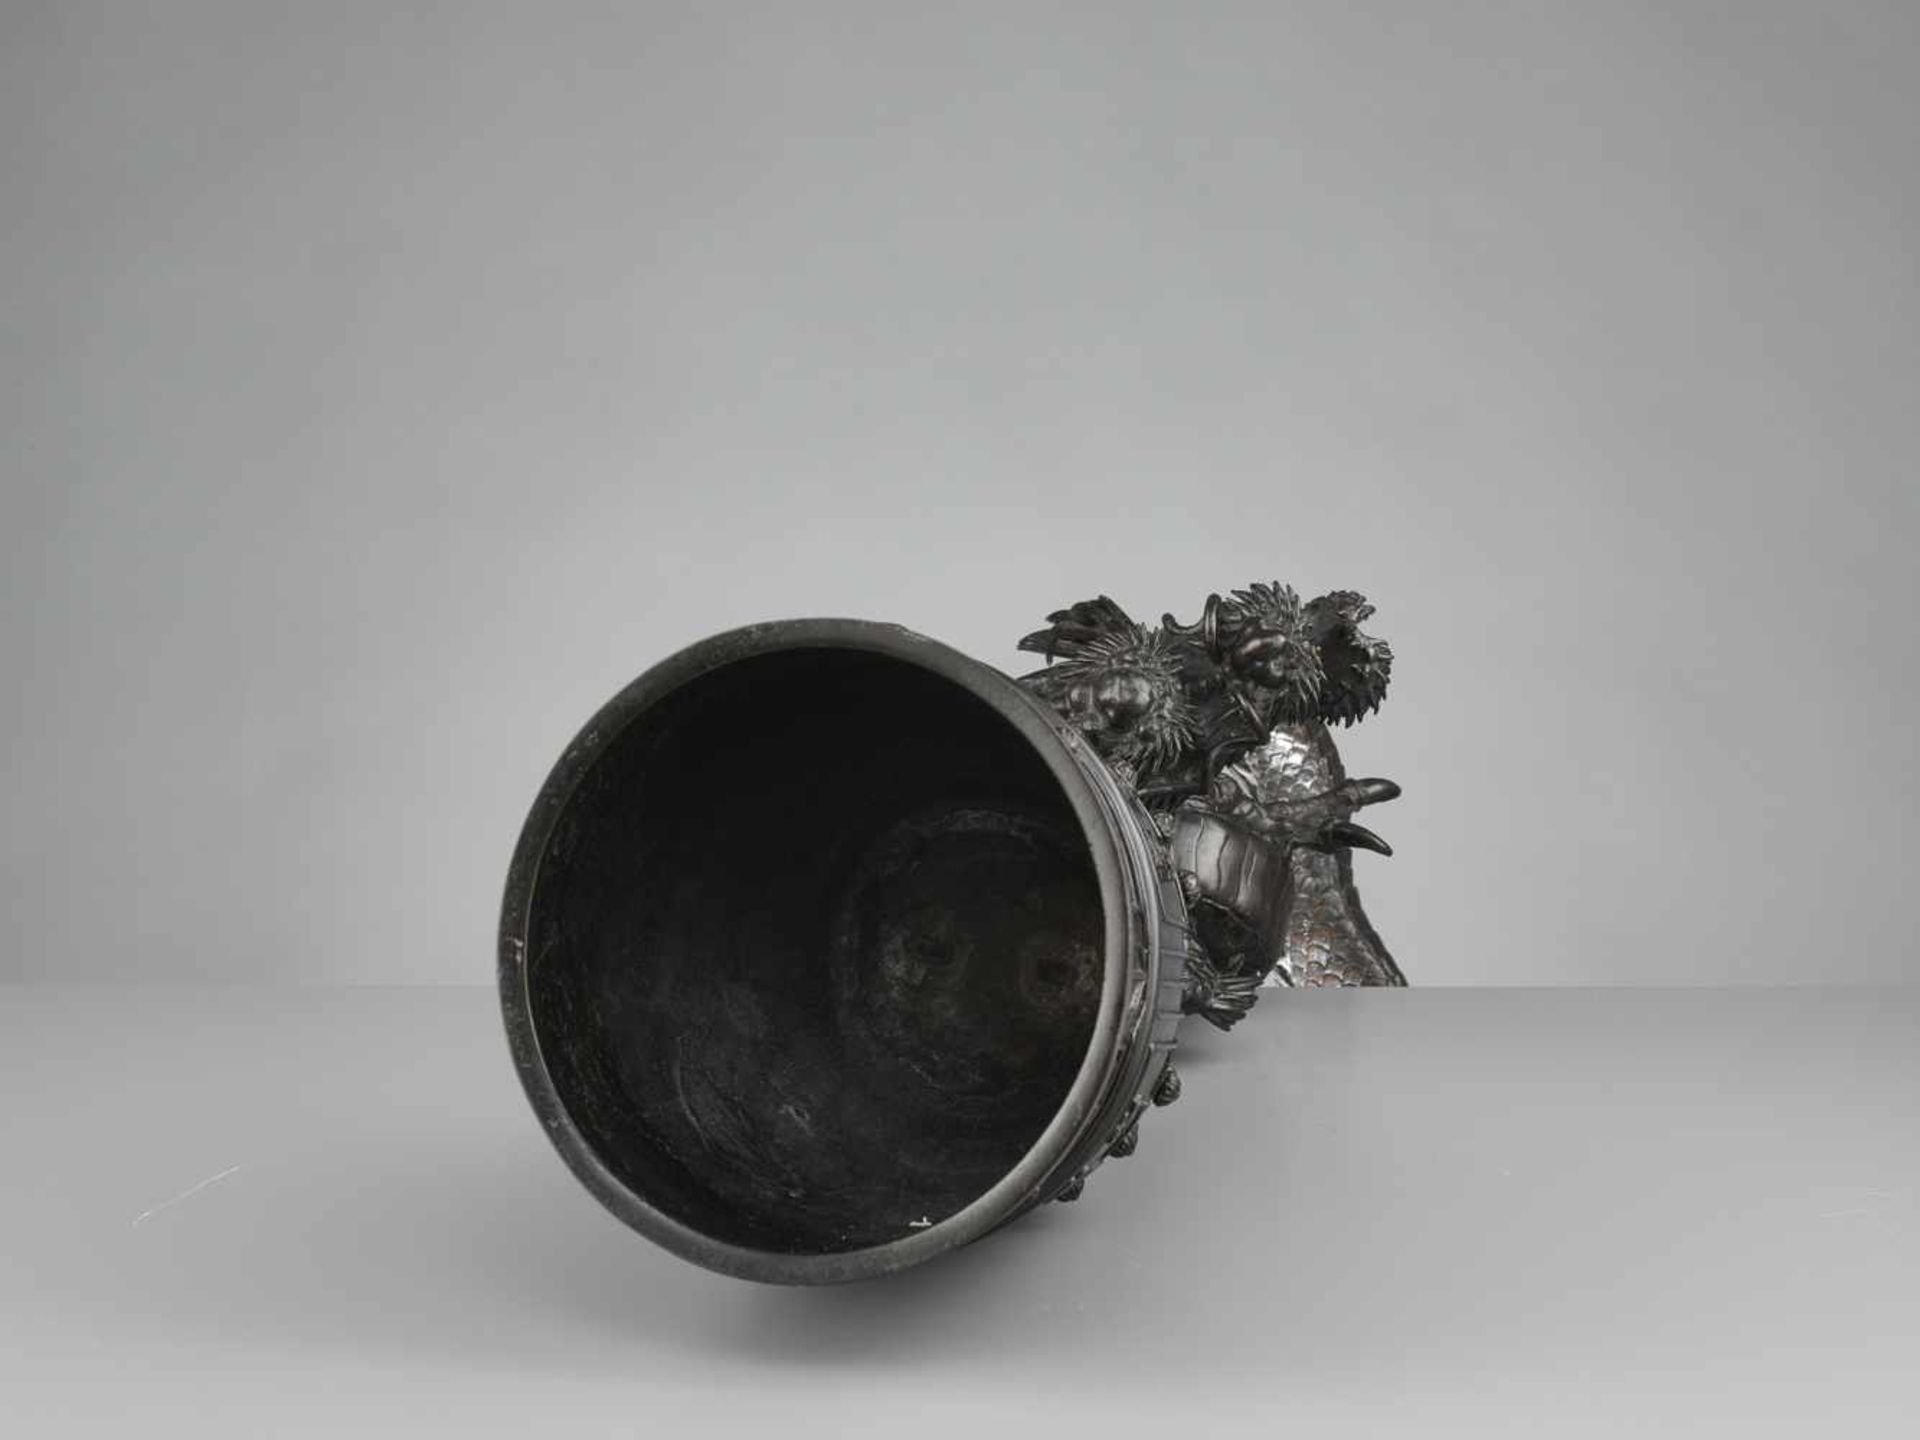 A LARGE AND MASSIVE DRAGON AND TEMPLE BELL BRONZE Japan, 19th century, late Edo period (1615-1868) - Image 10 of 10